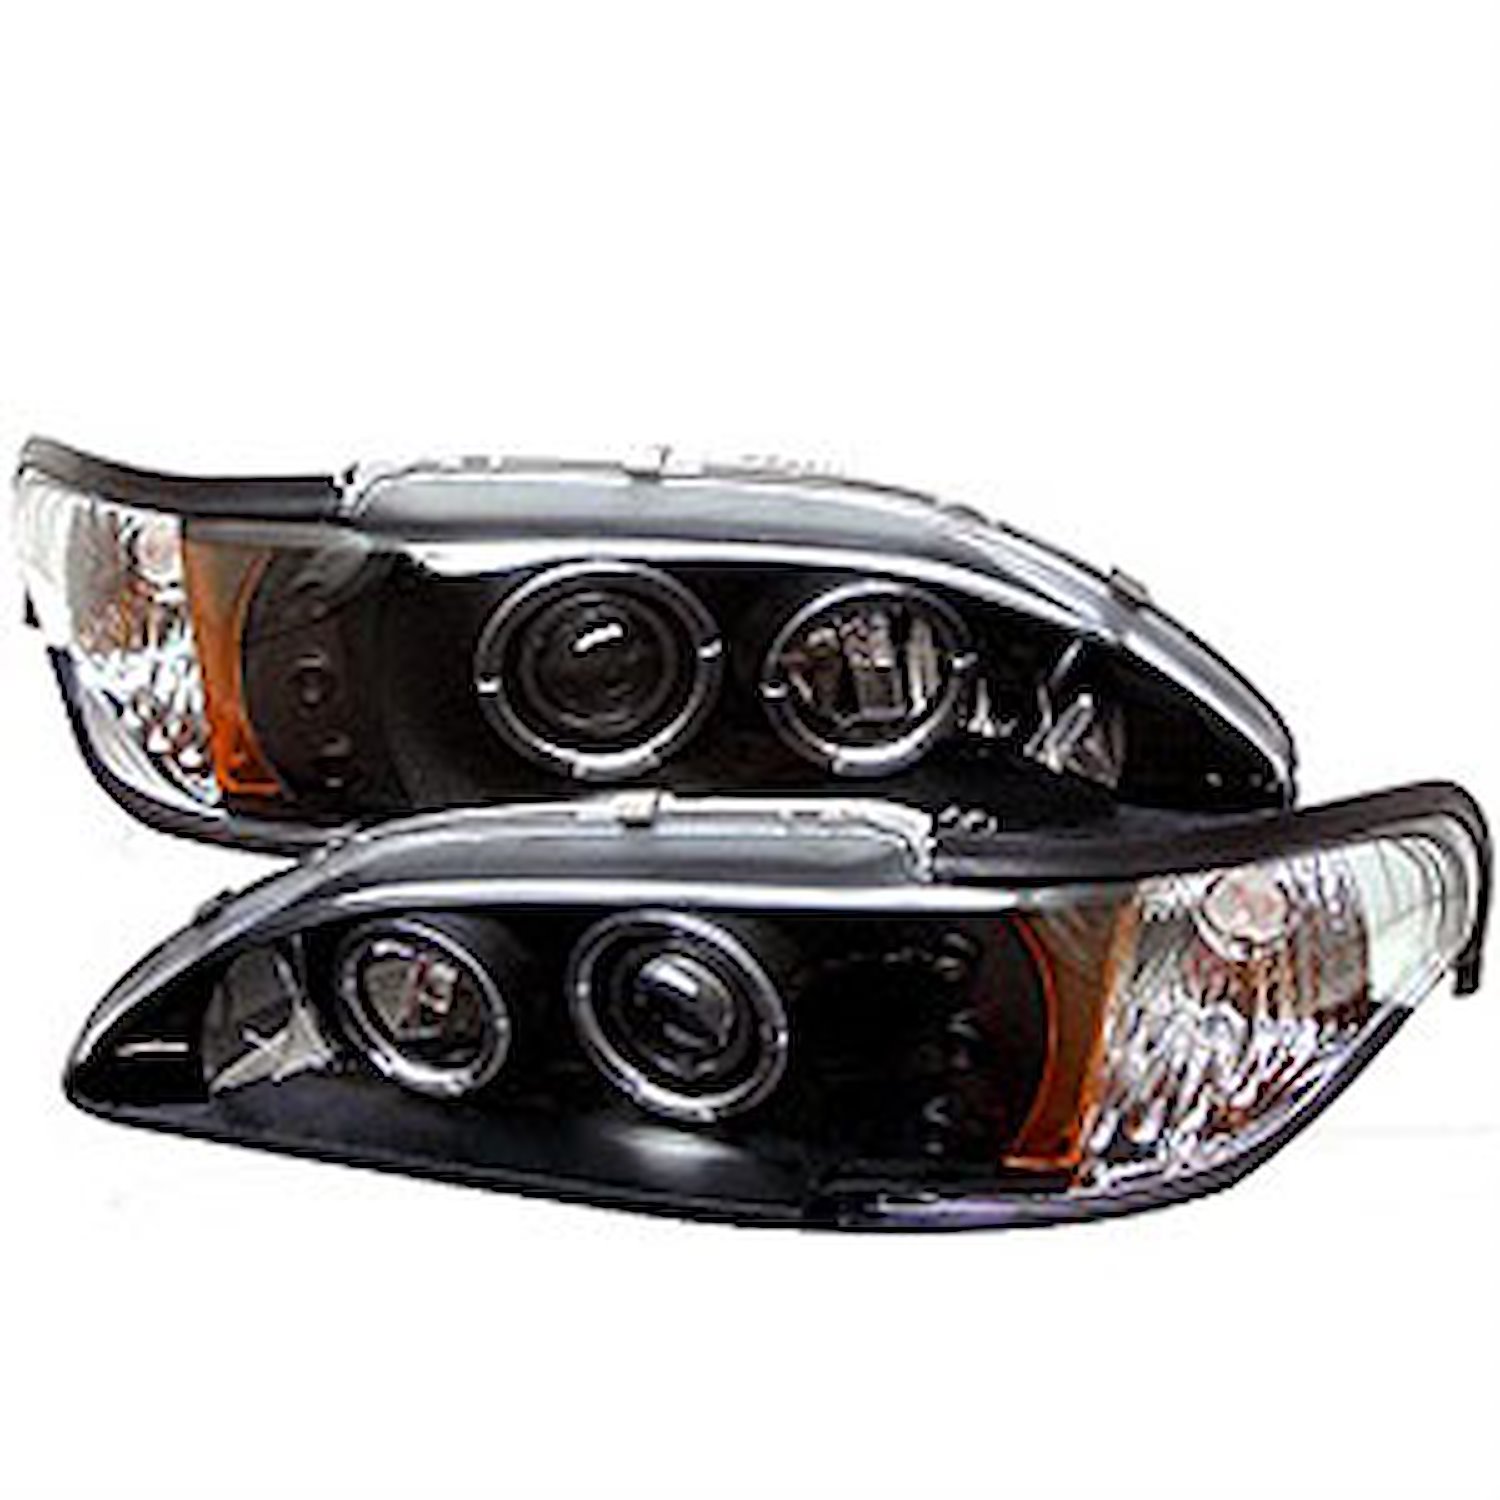 Halo LED Projector Headlights 1994-1998 Ford Mustang